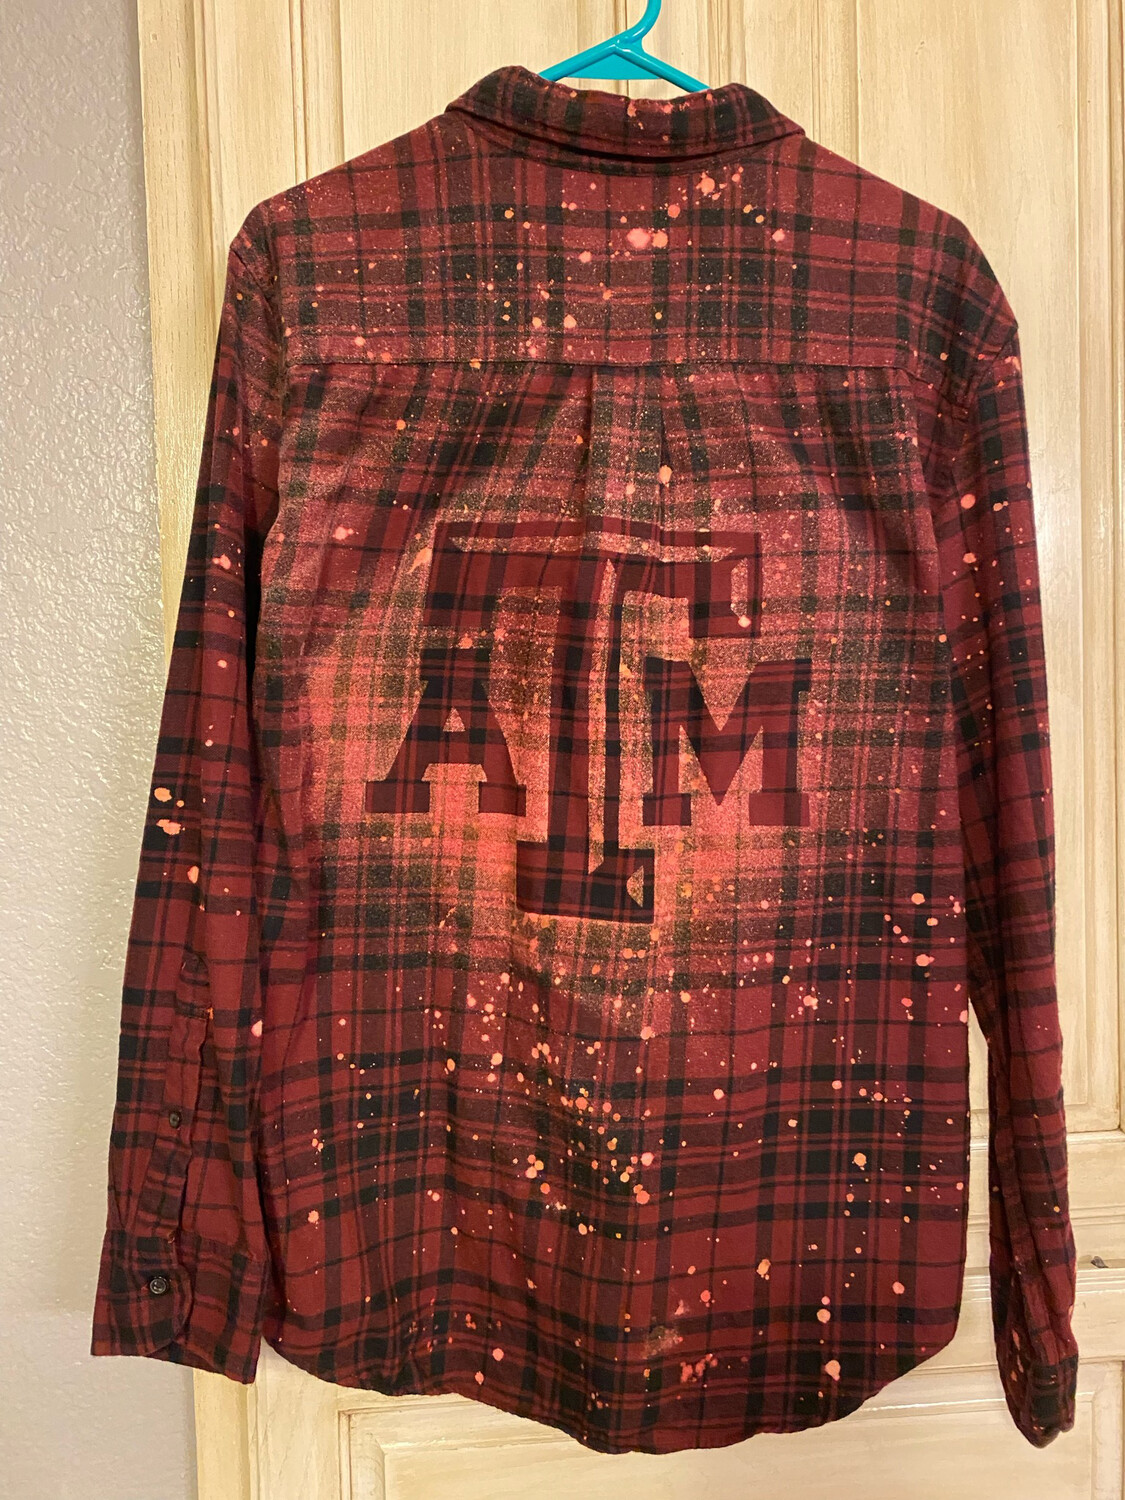 ATM - Bleached Flannel Shirt - X-Large